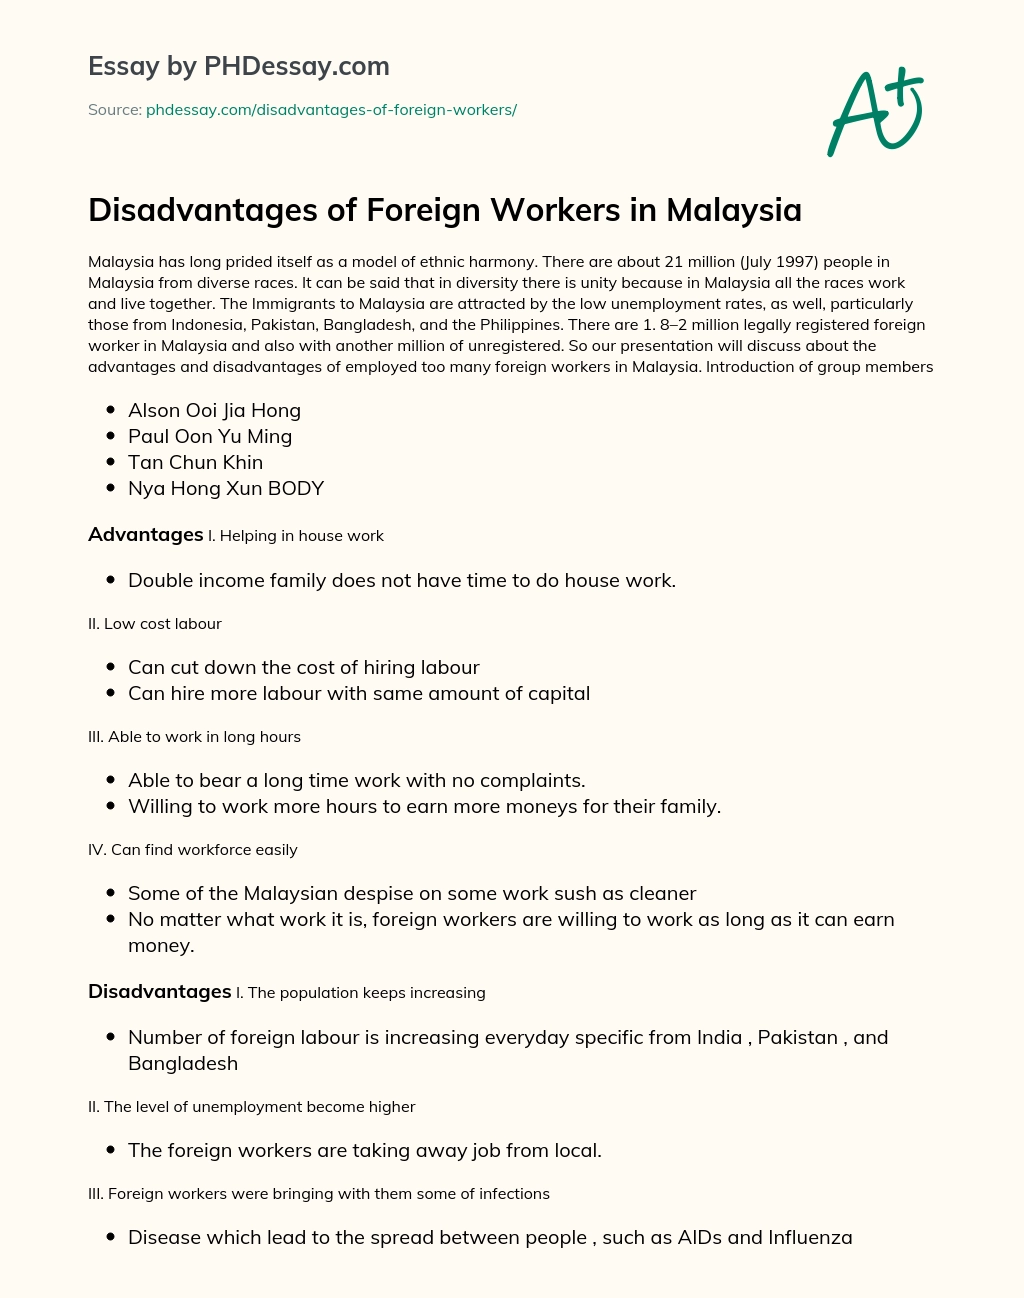 Disadvantages of Foreign Workers in Malaysia essay